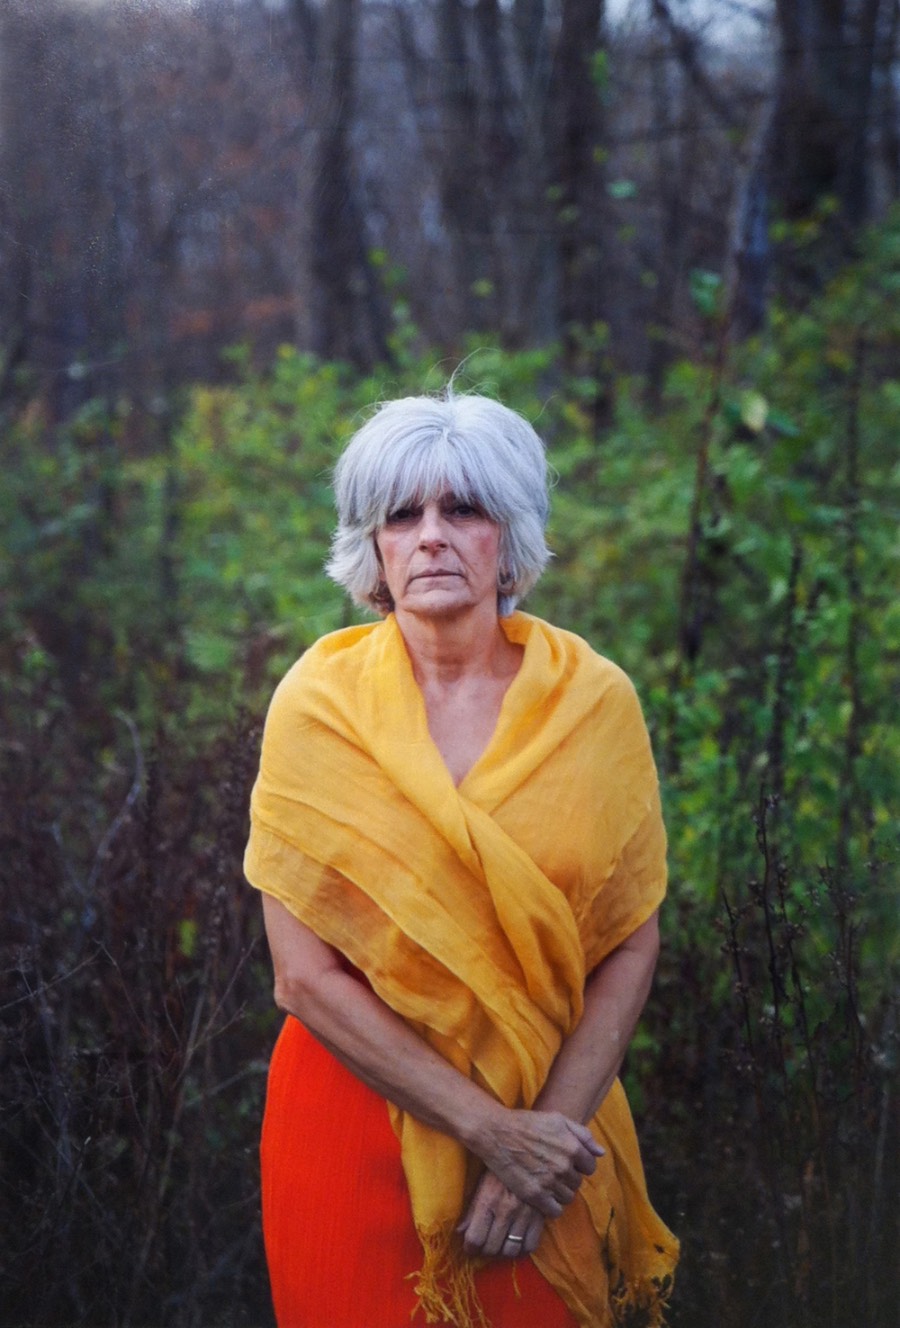 Portrait of an adult with short white hair in a red dress and yellow shawl standing in a closely cropped landscape 